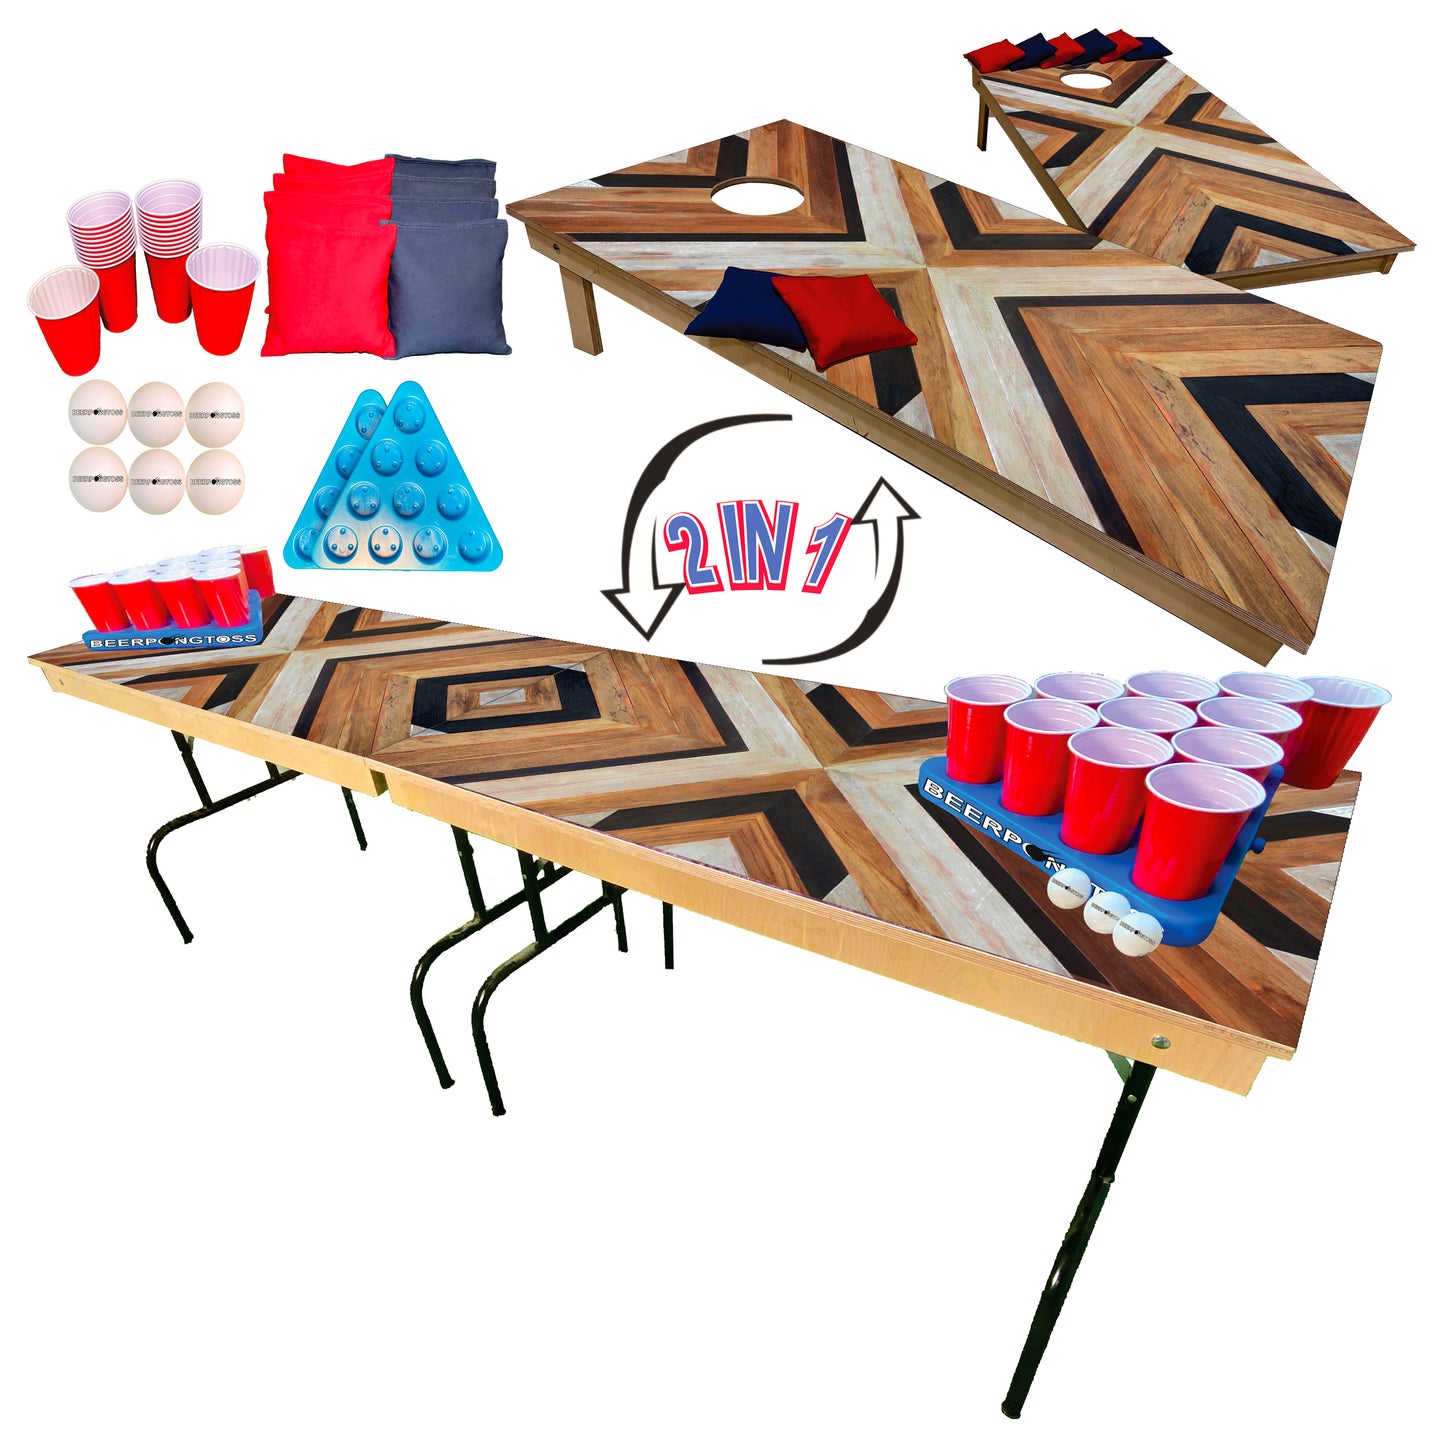 2-in-1 Cornhole & Pong Table - 4 Piece Wood